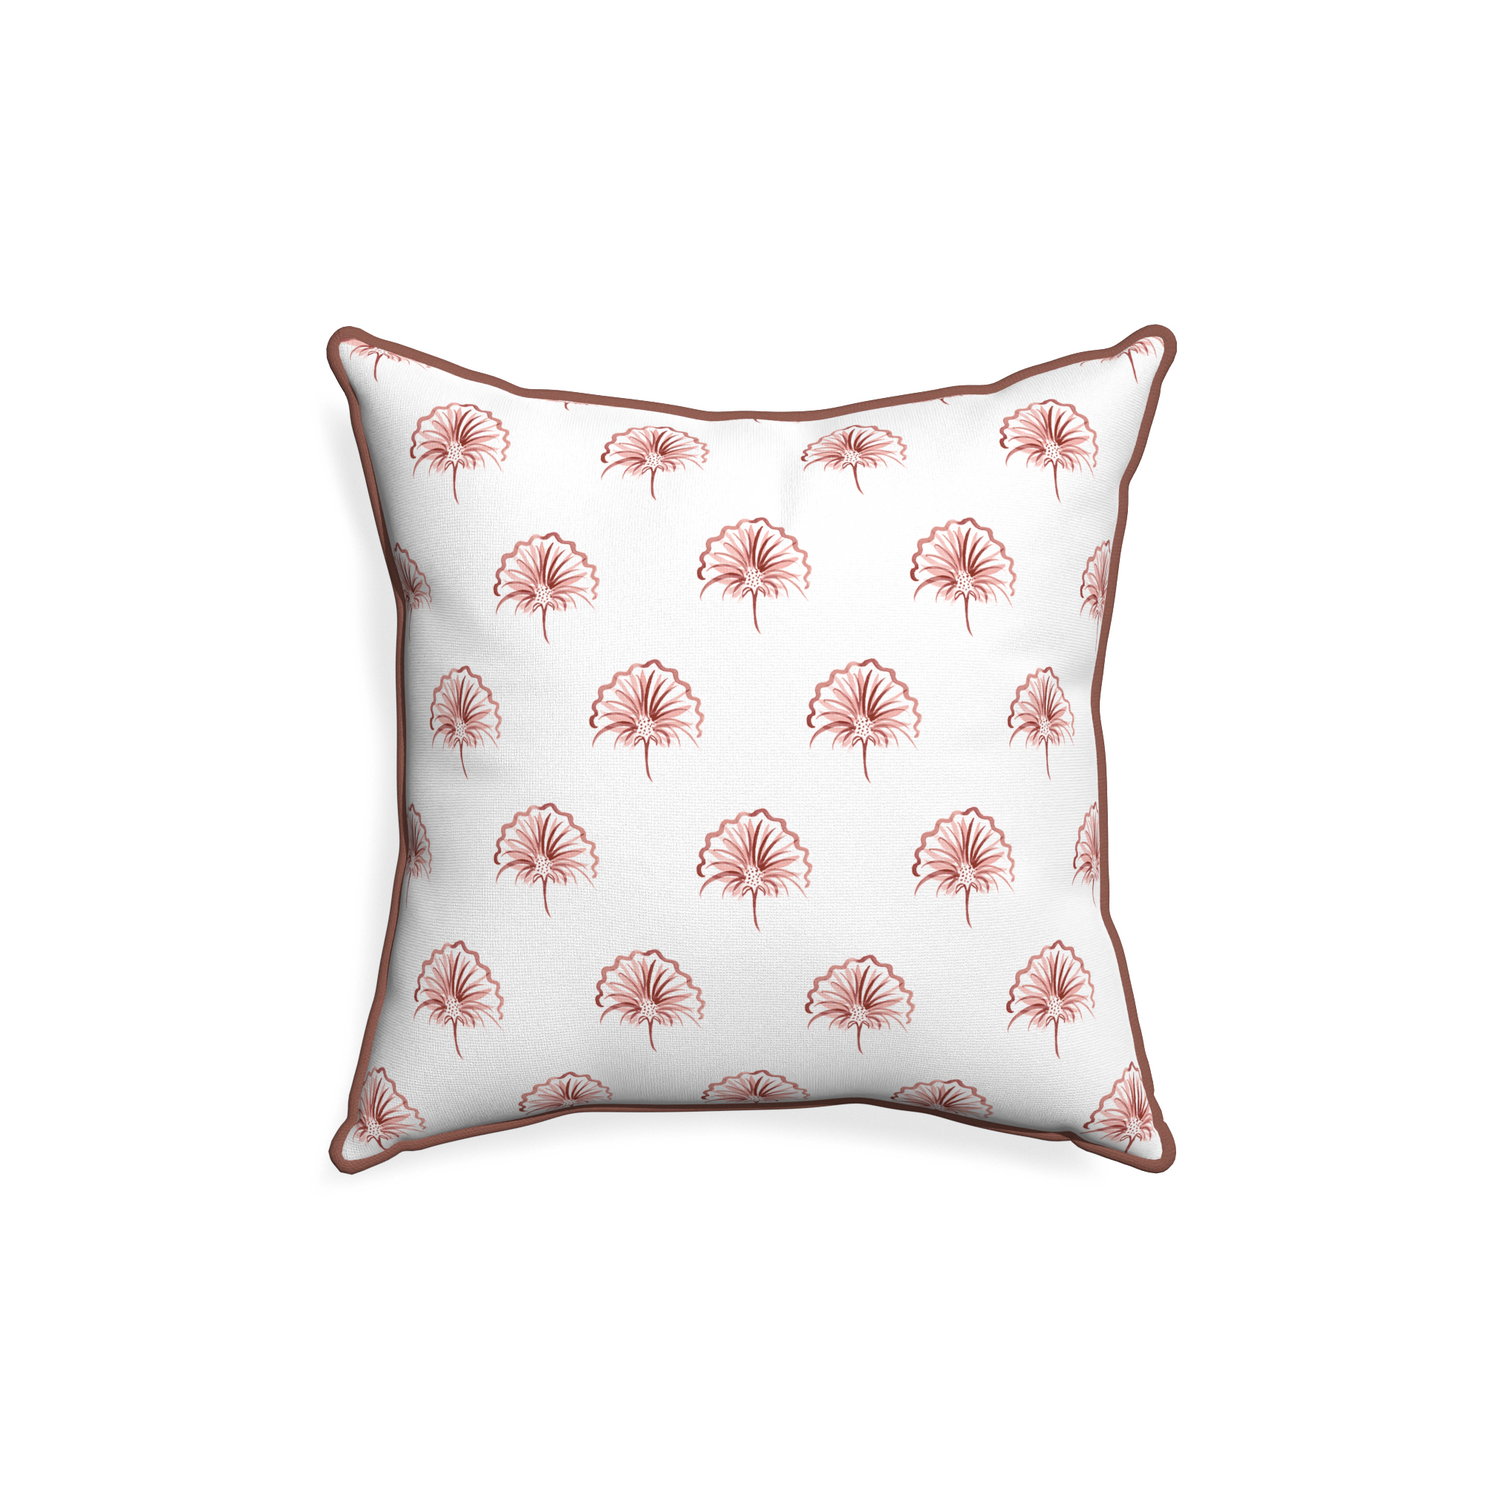 18-square penelope rose custom pillow with w piping on white background